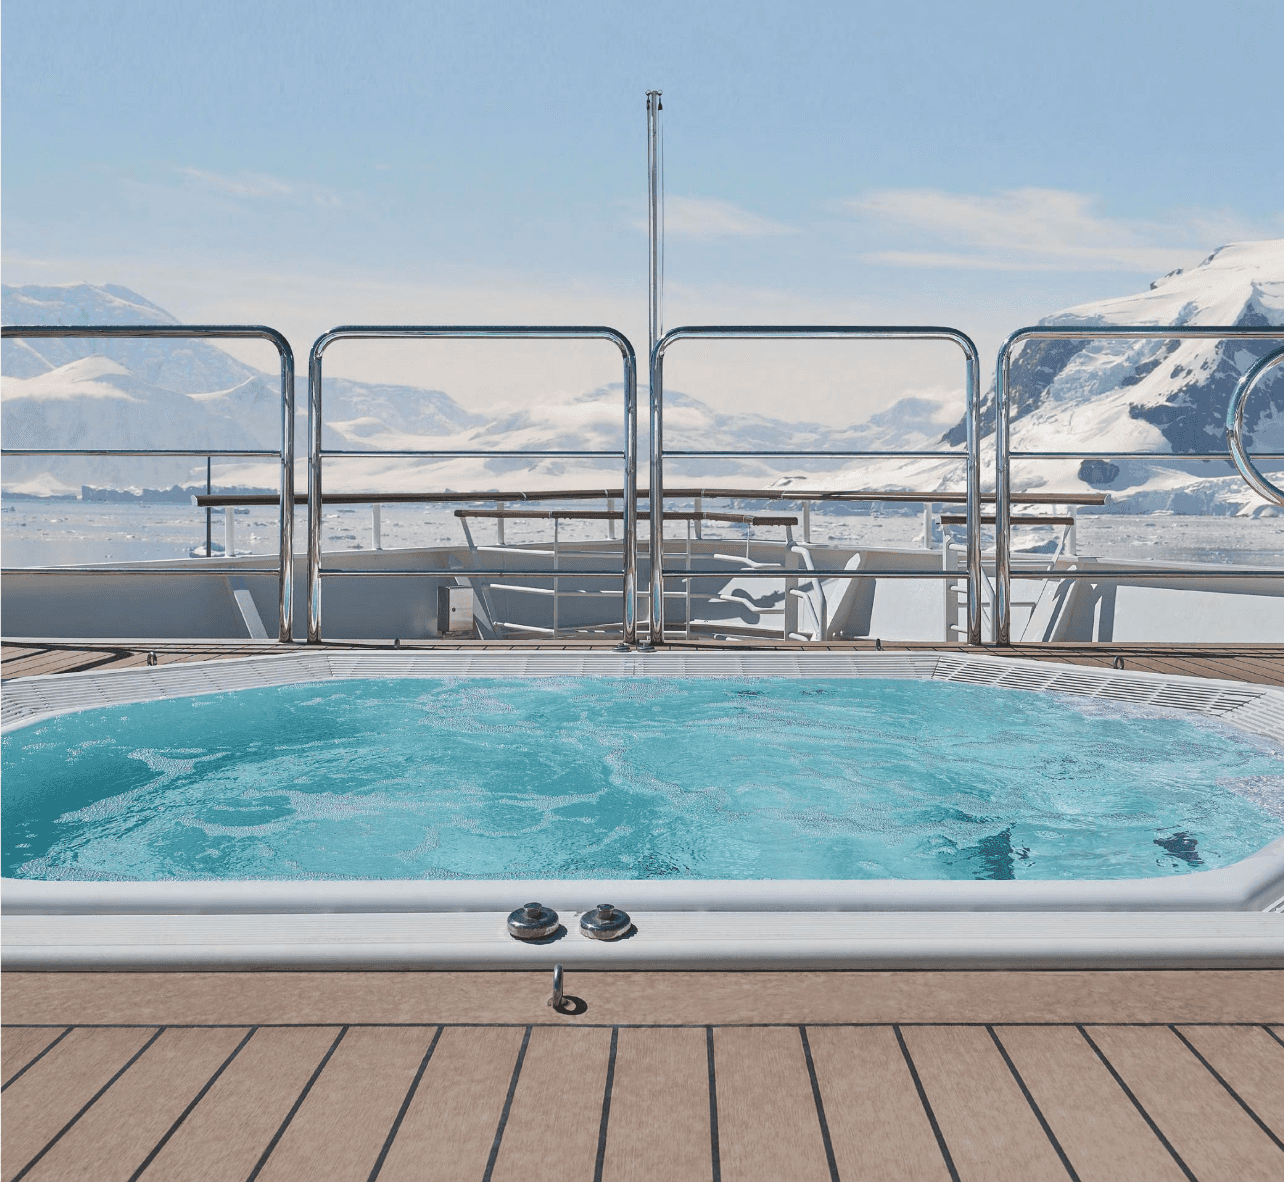 The cruise ship’s outdoor jacuzzi with a majestic outdoor view